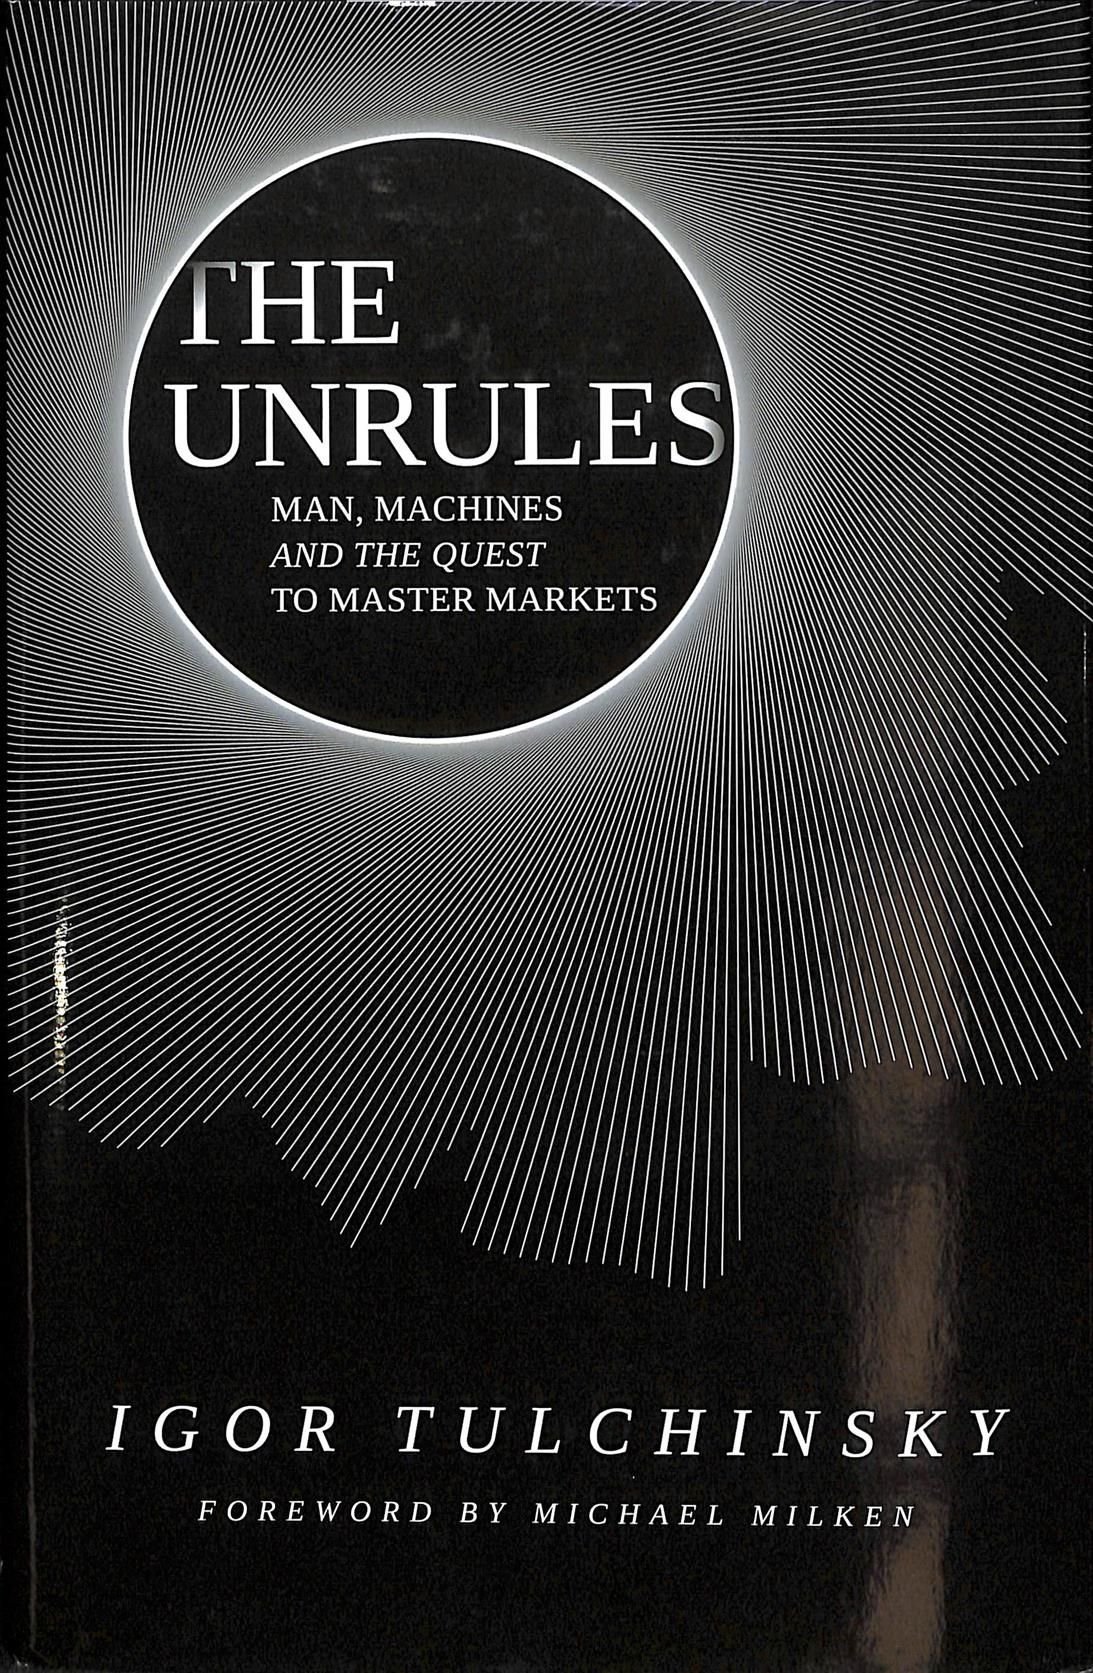 The UnRules - Man, Machines and the Quest to Master Markets